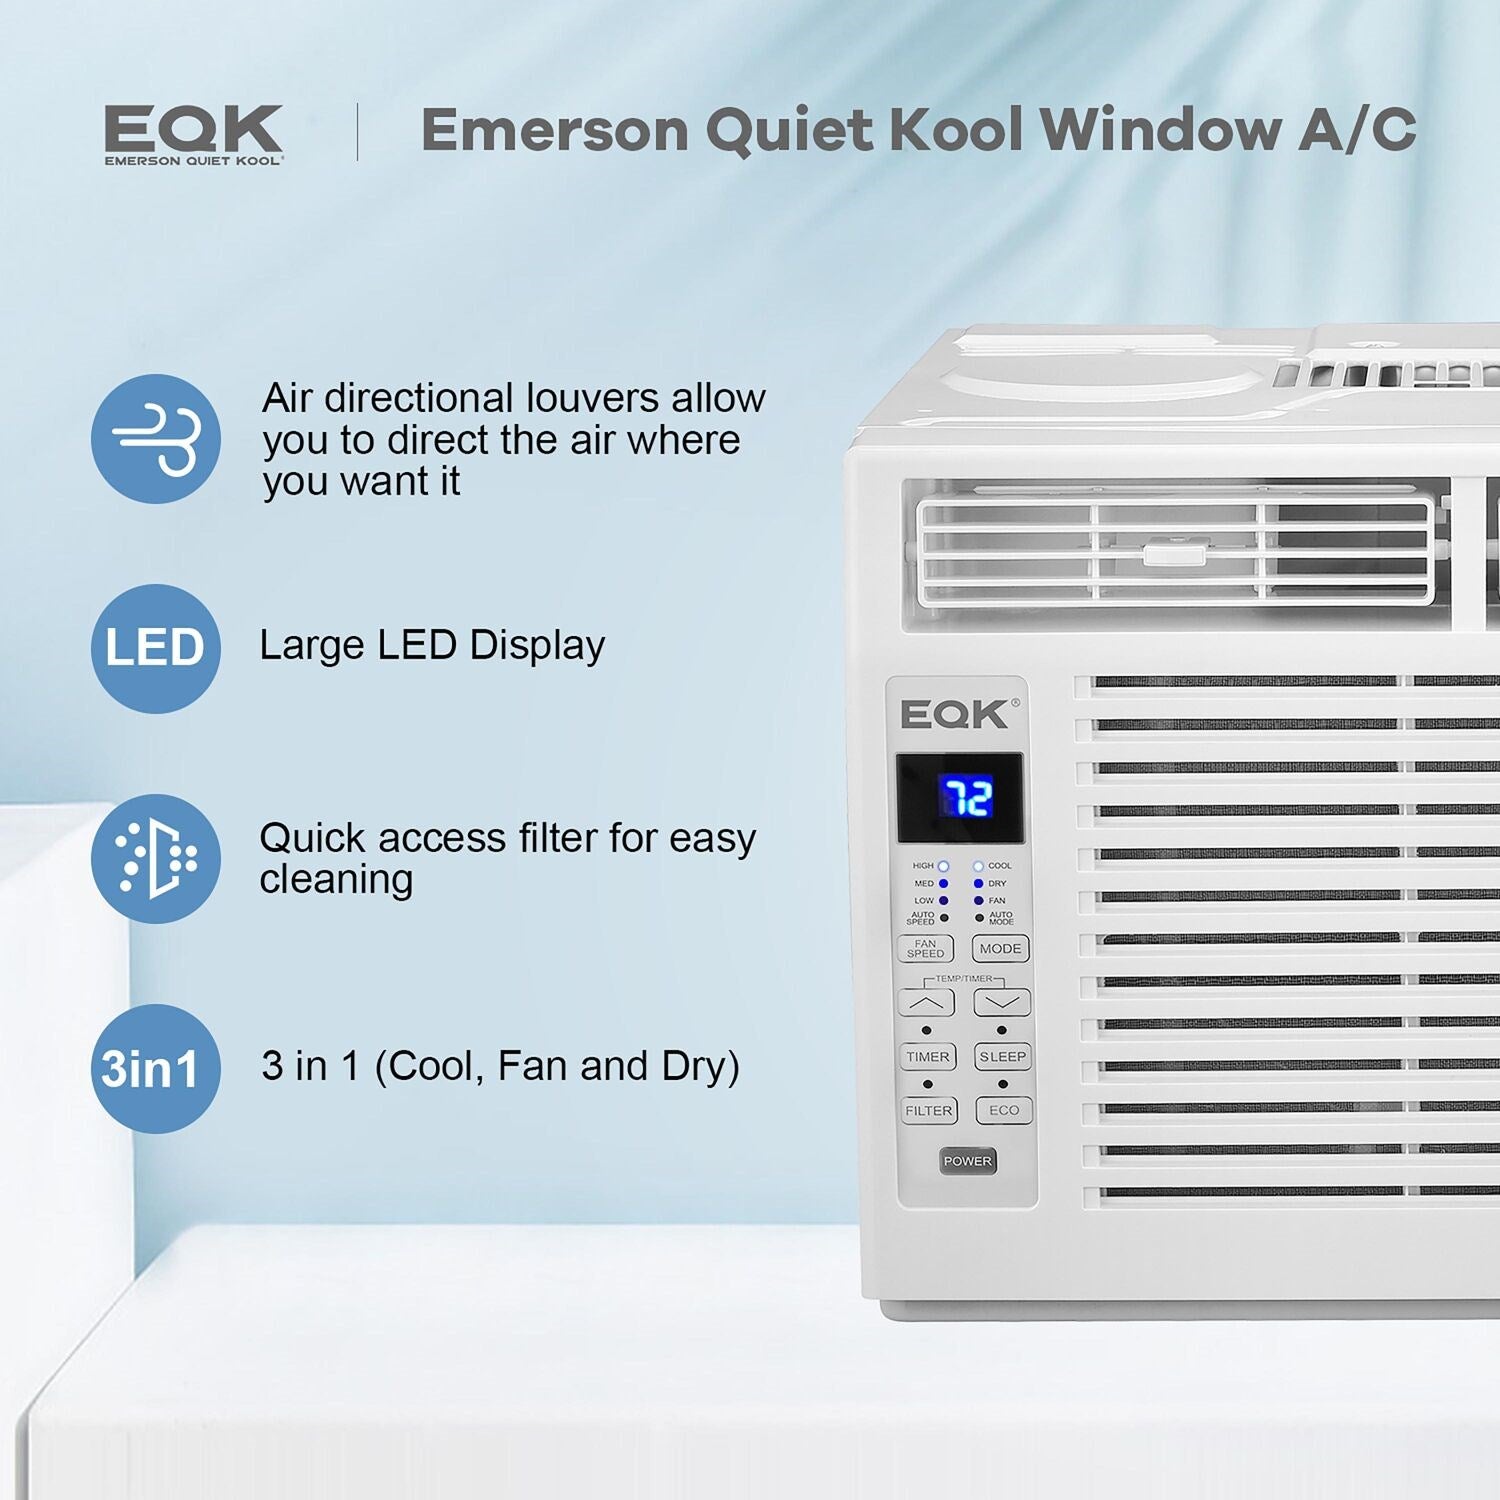 Emerson Quiet - 6000 BTU Window Air Conditioner with Electronic Controls | EARC6RE1